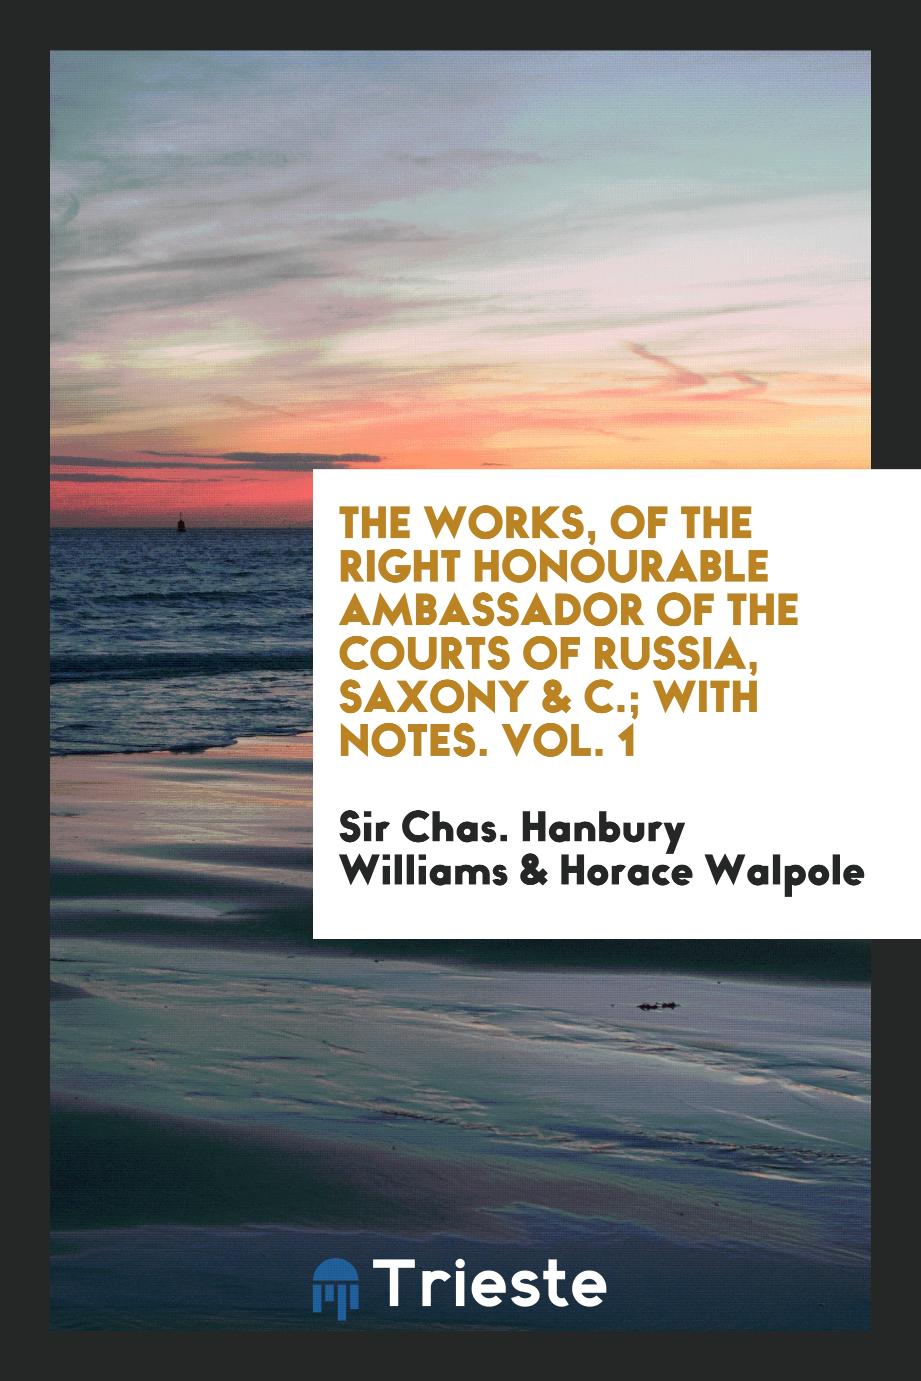 The works, of the Right Honourable Ambassador of the courts of Russia, Saxony & c.; With notes. Vol. 1